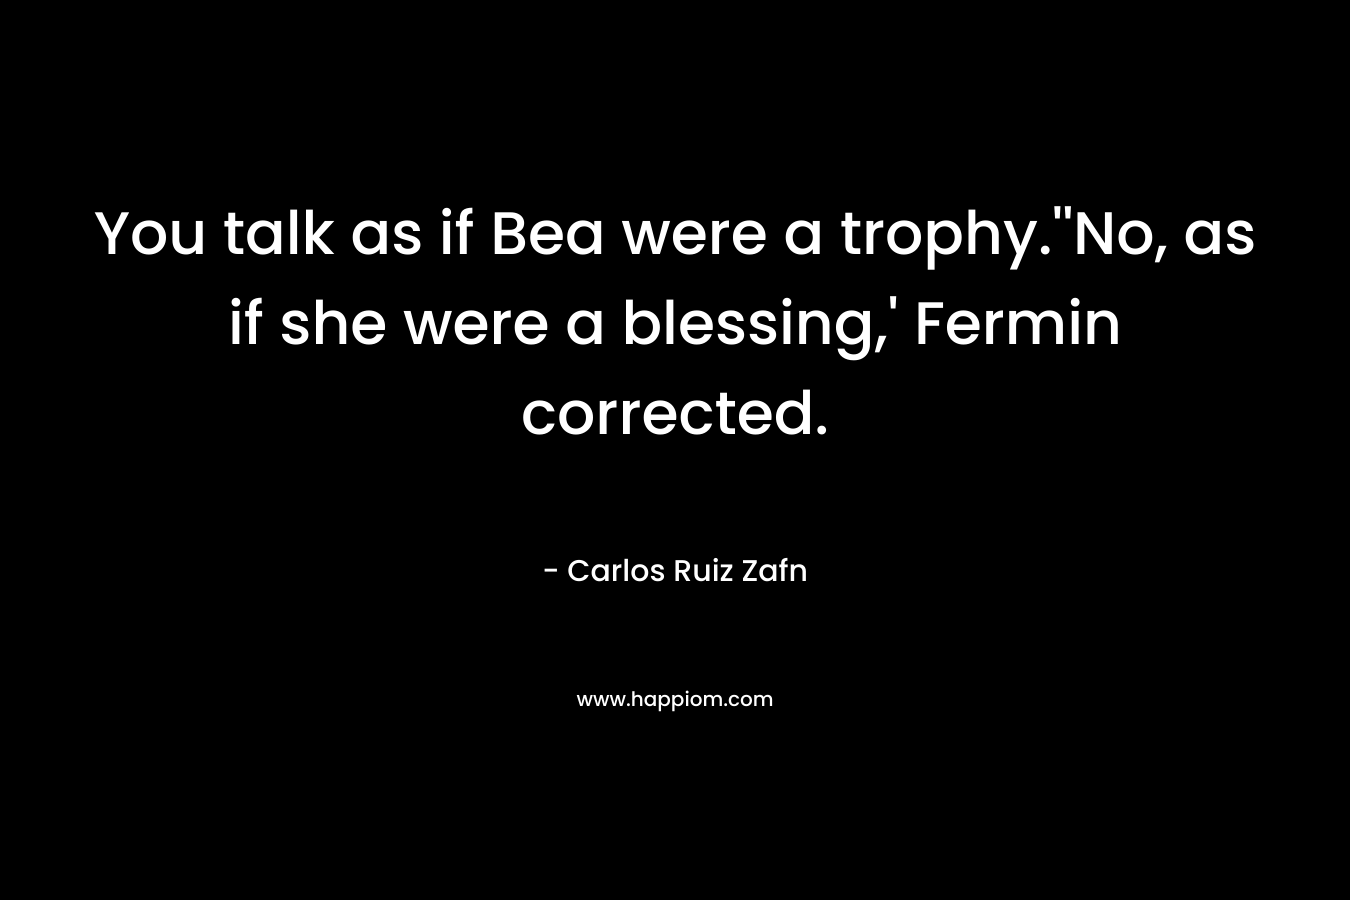 You talk as if Bea were a trophy.”No, as if she were a blessing,’ Fermin corrected. – Carlos Ruiz Zafn